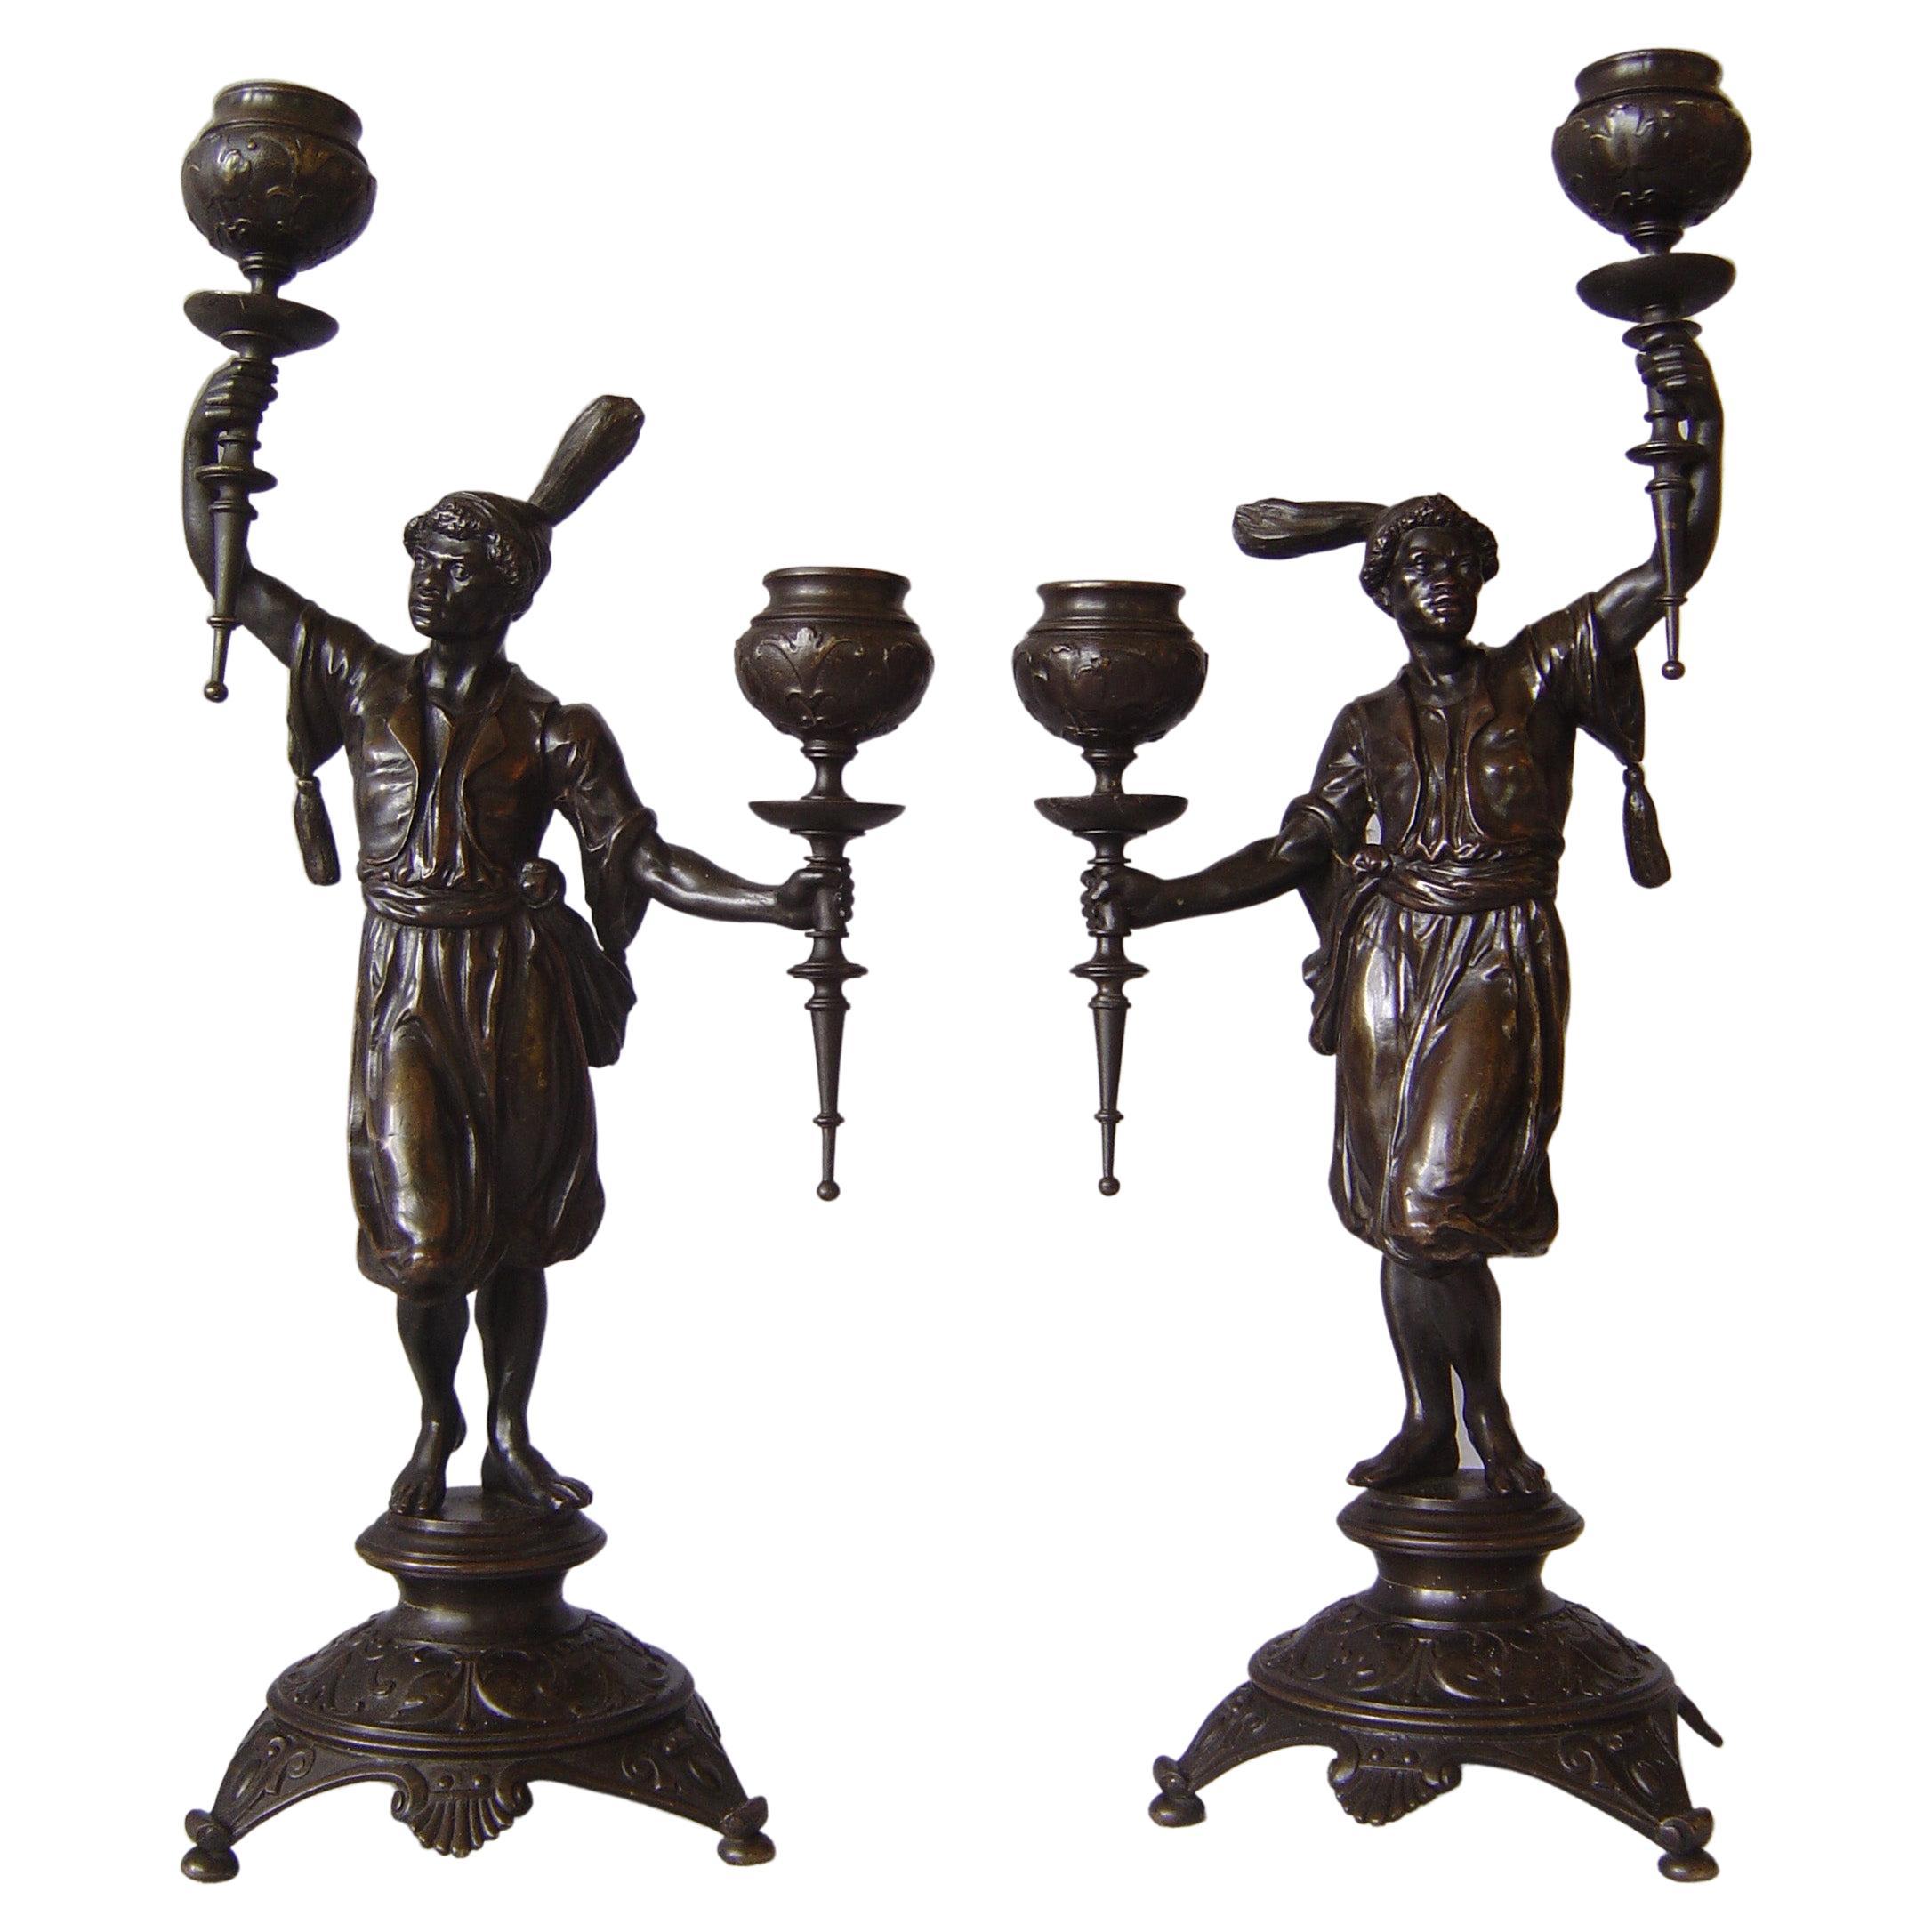 True pair of candelabra in patinated bronze, French late 19th century